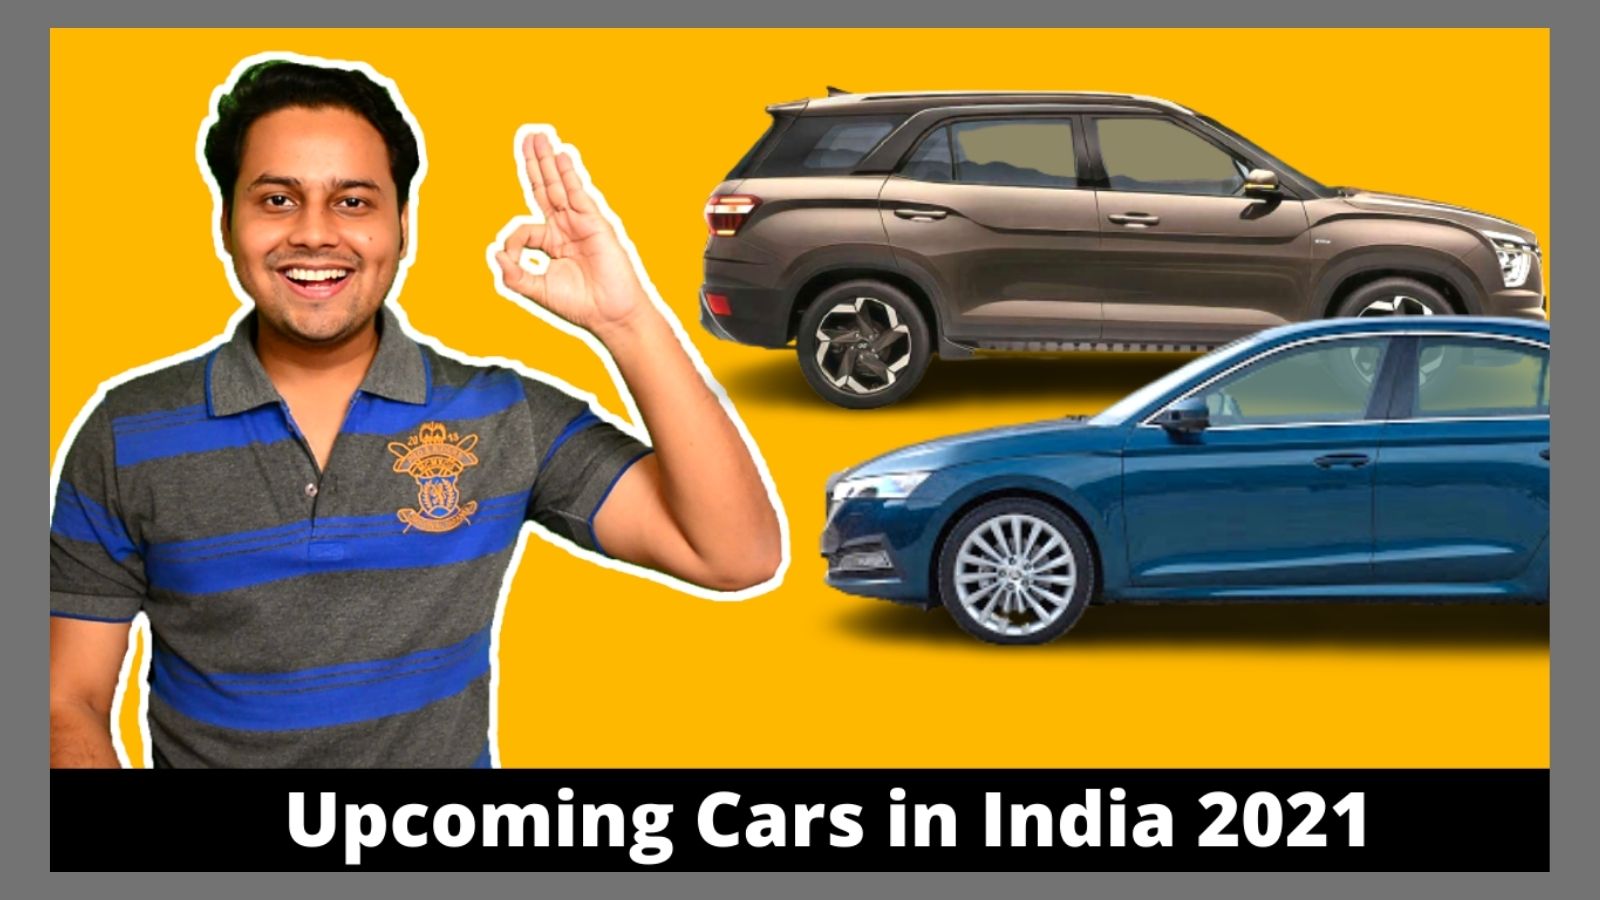 Upcoming cars in India 2021